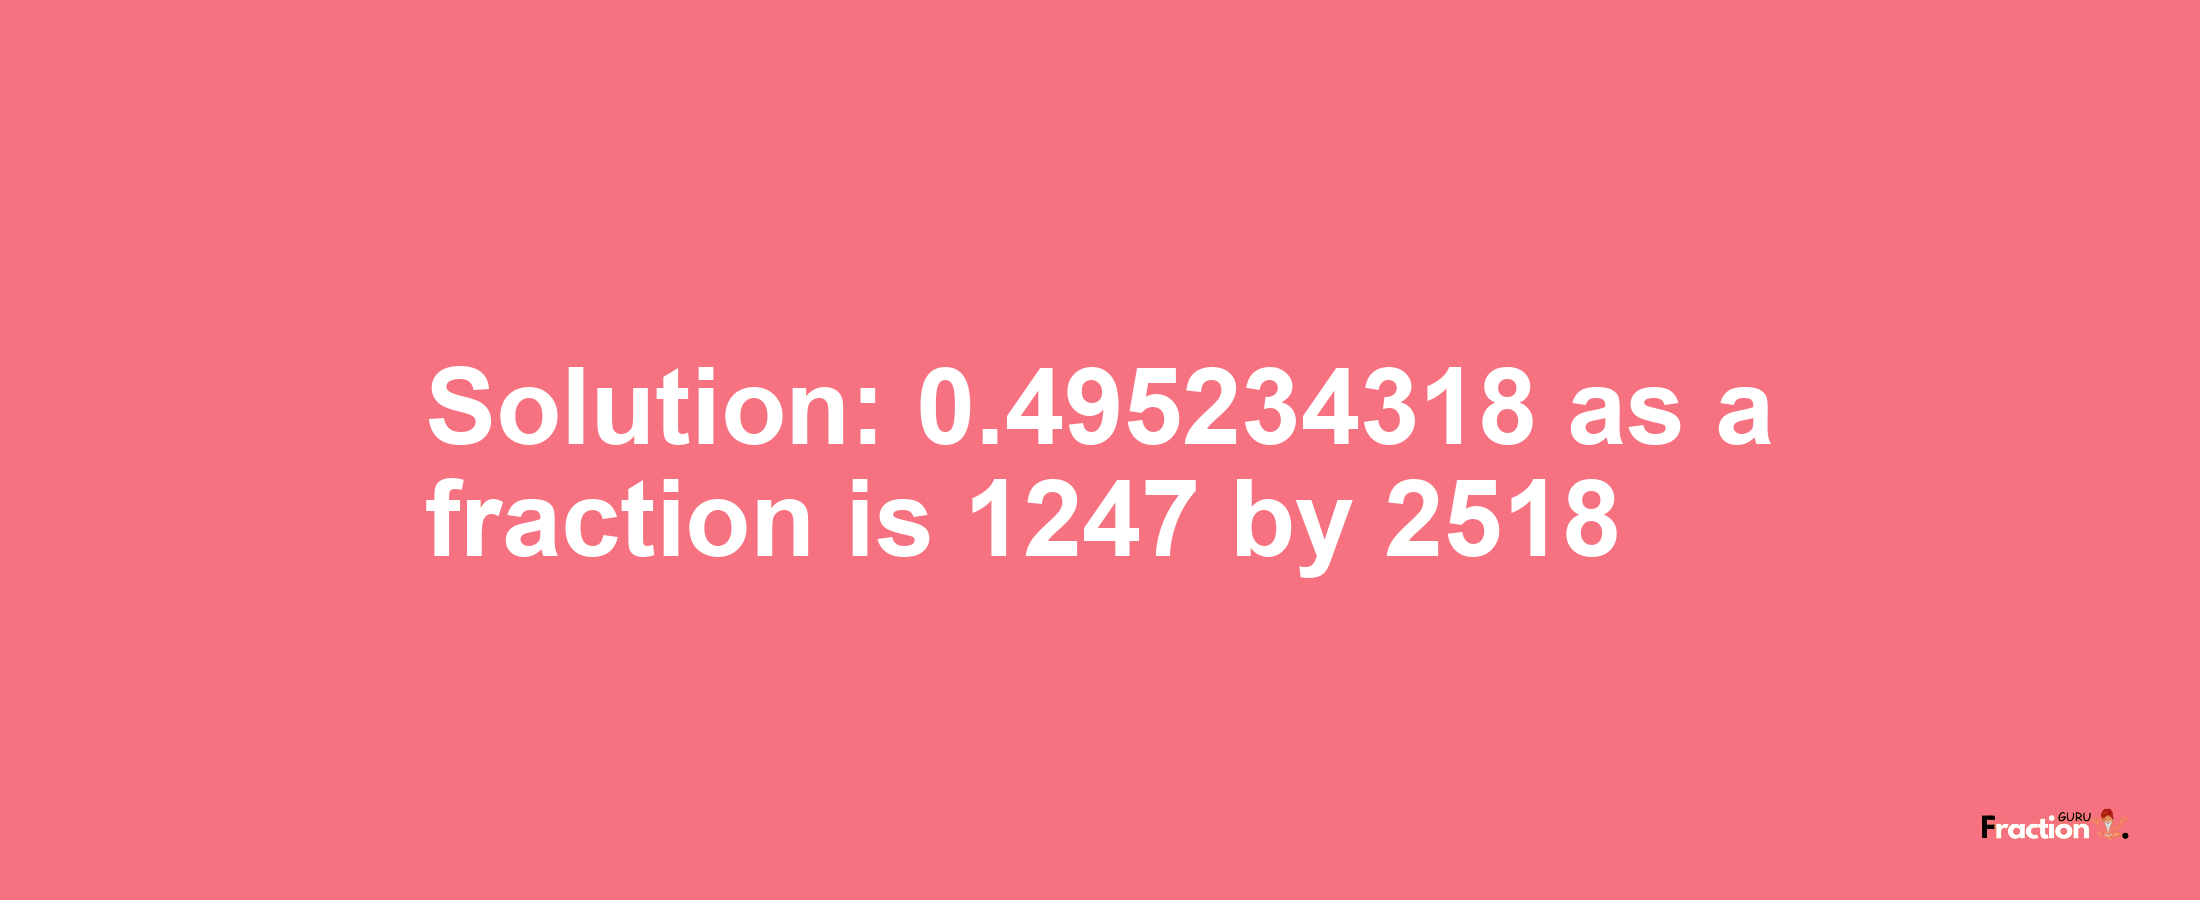 Solution:0.495234318 as a fraction is 1247/2518